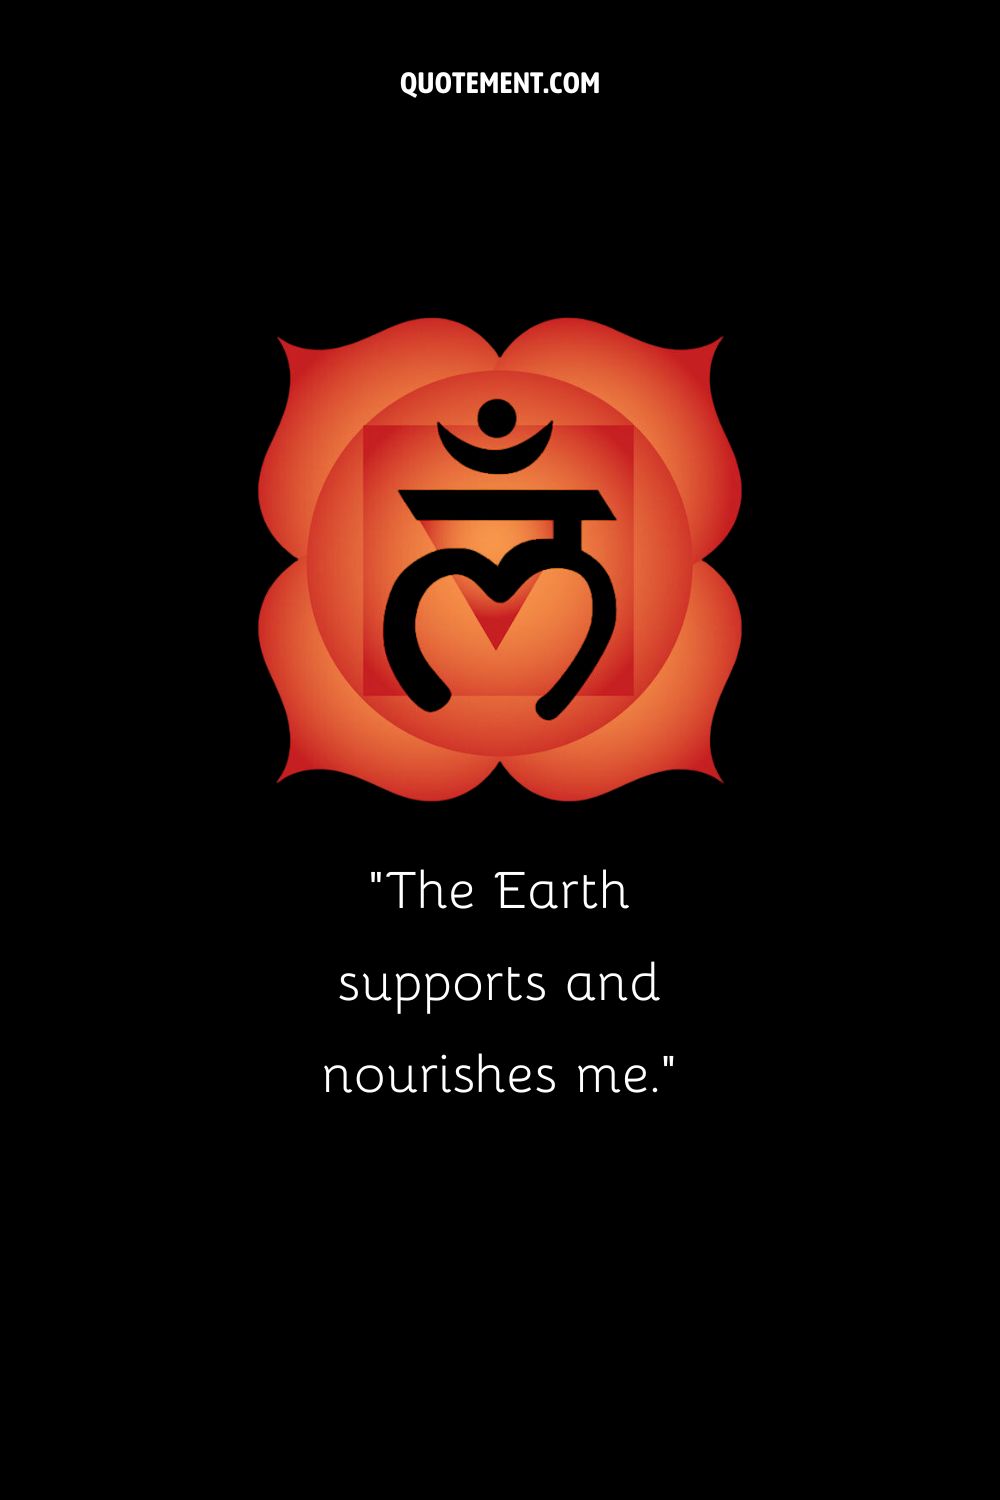 The root chakra symbol representing an affirmation for reconnecting with the Earth
